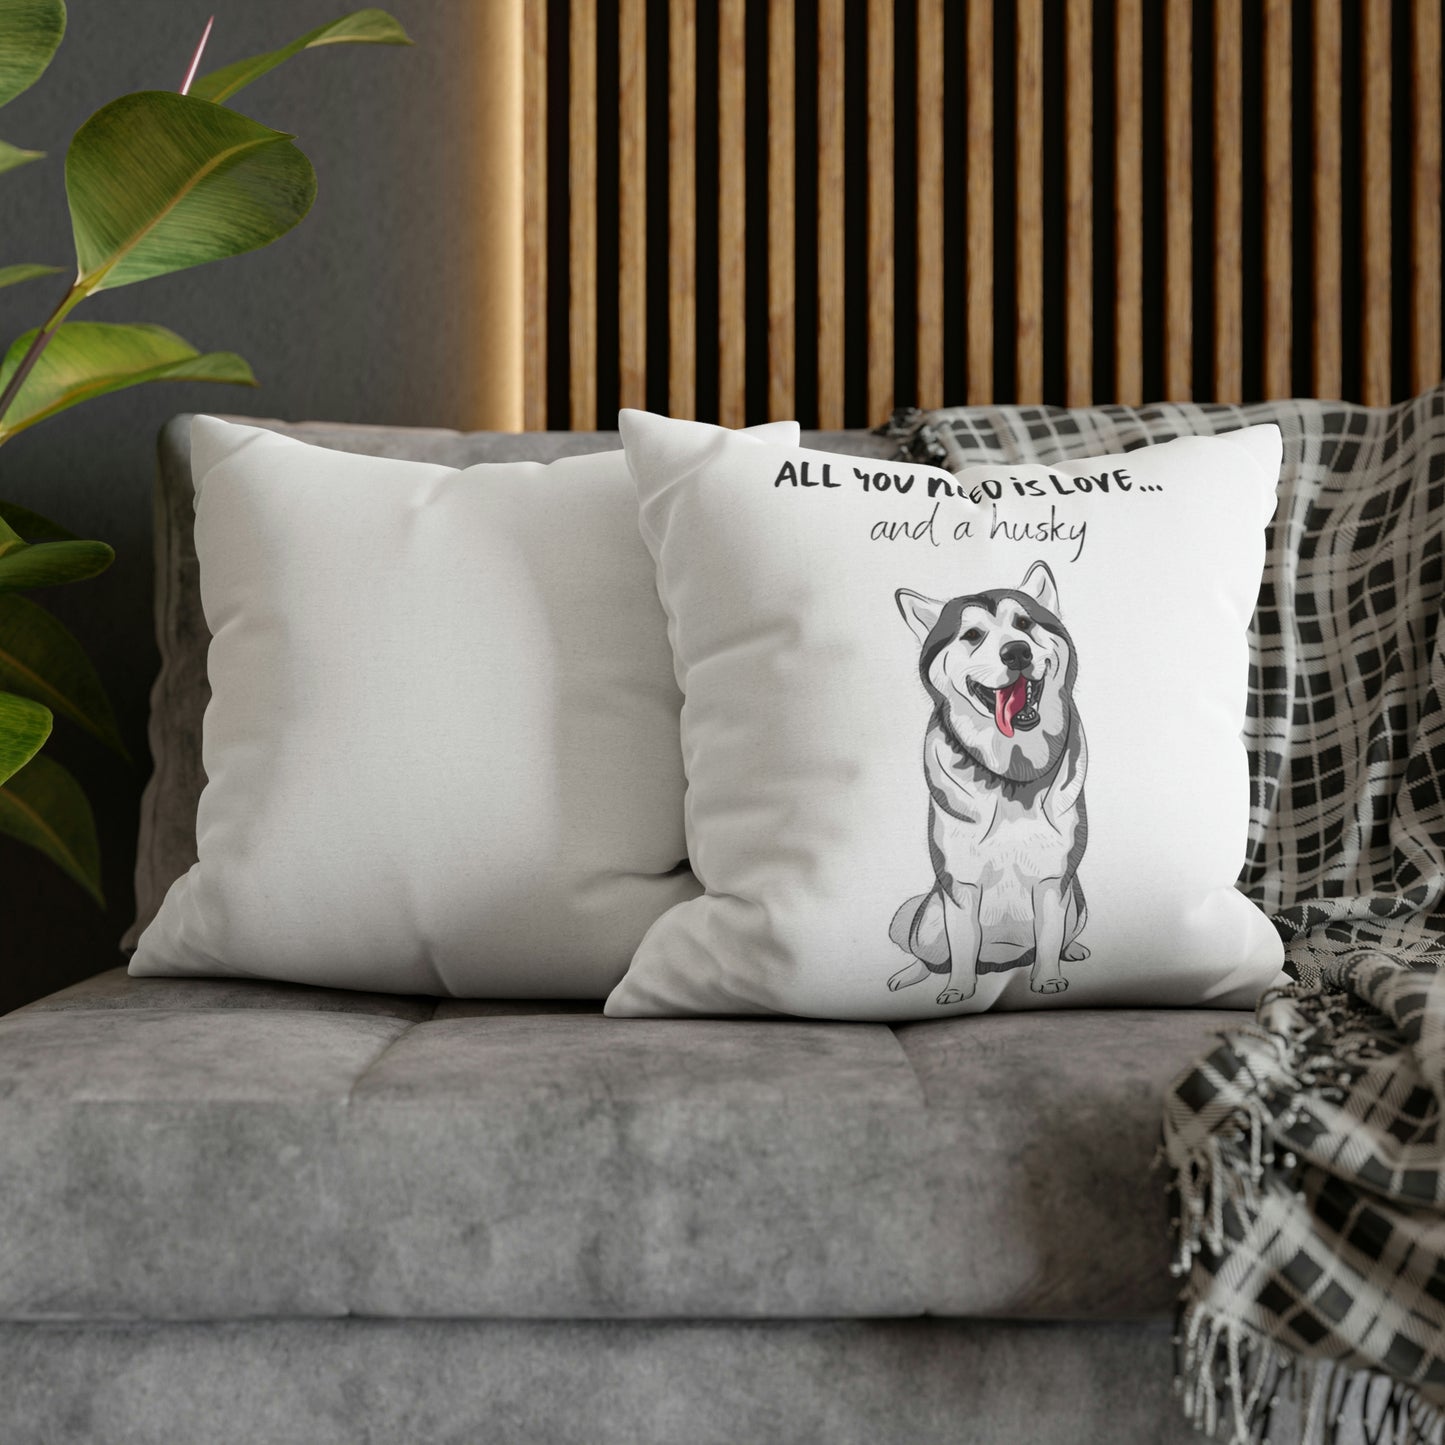 All You Need Is Love And A Husky Spun Polyester Square Pillow Case | Happy Dog Pillow Covers